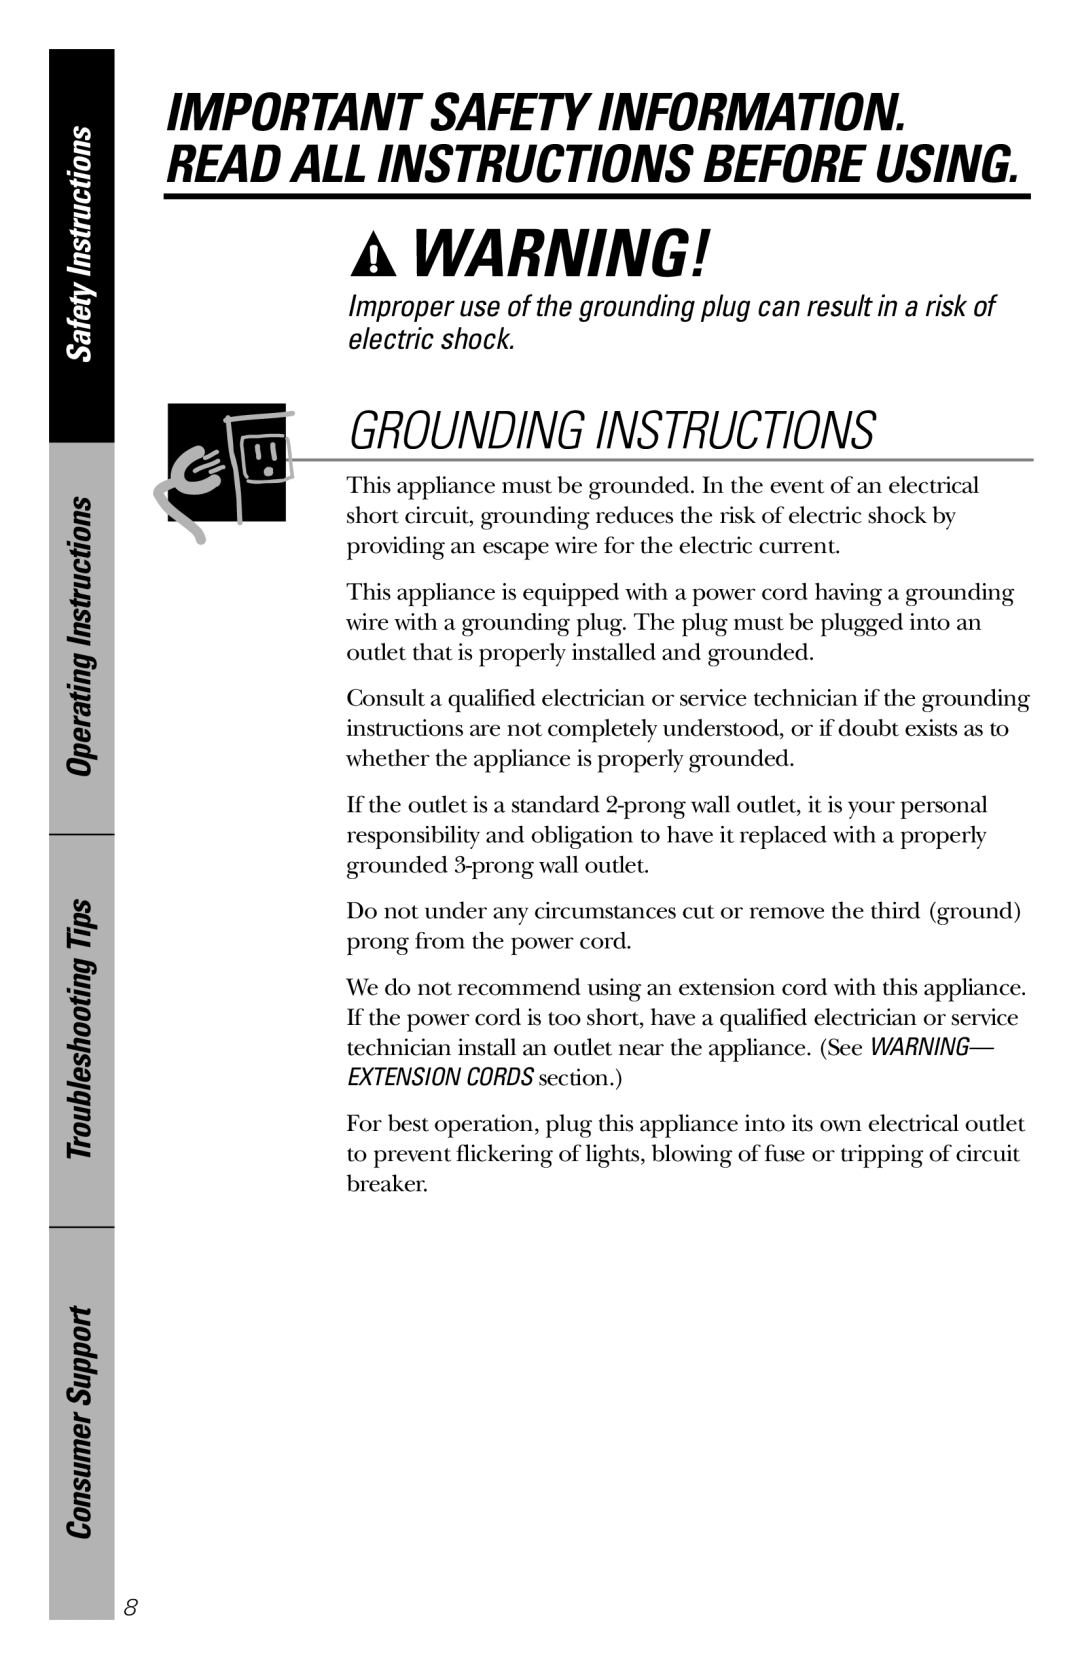 GE REM25 Grounding Instructions, Important Safety Information. Read All Instructions Before Using, Safety Instructions 